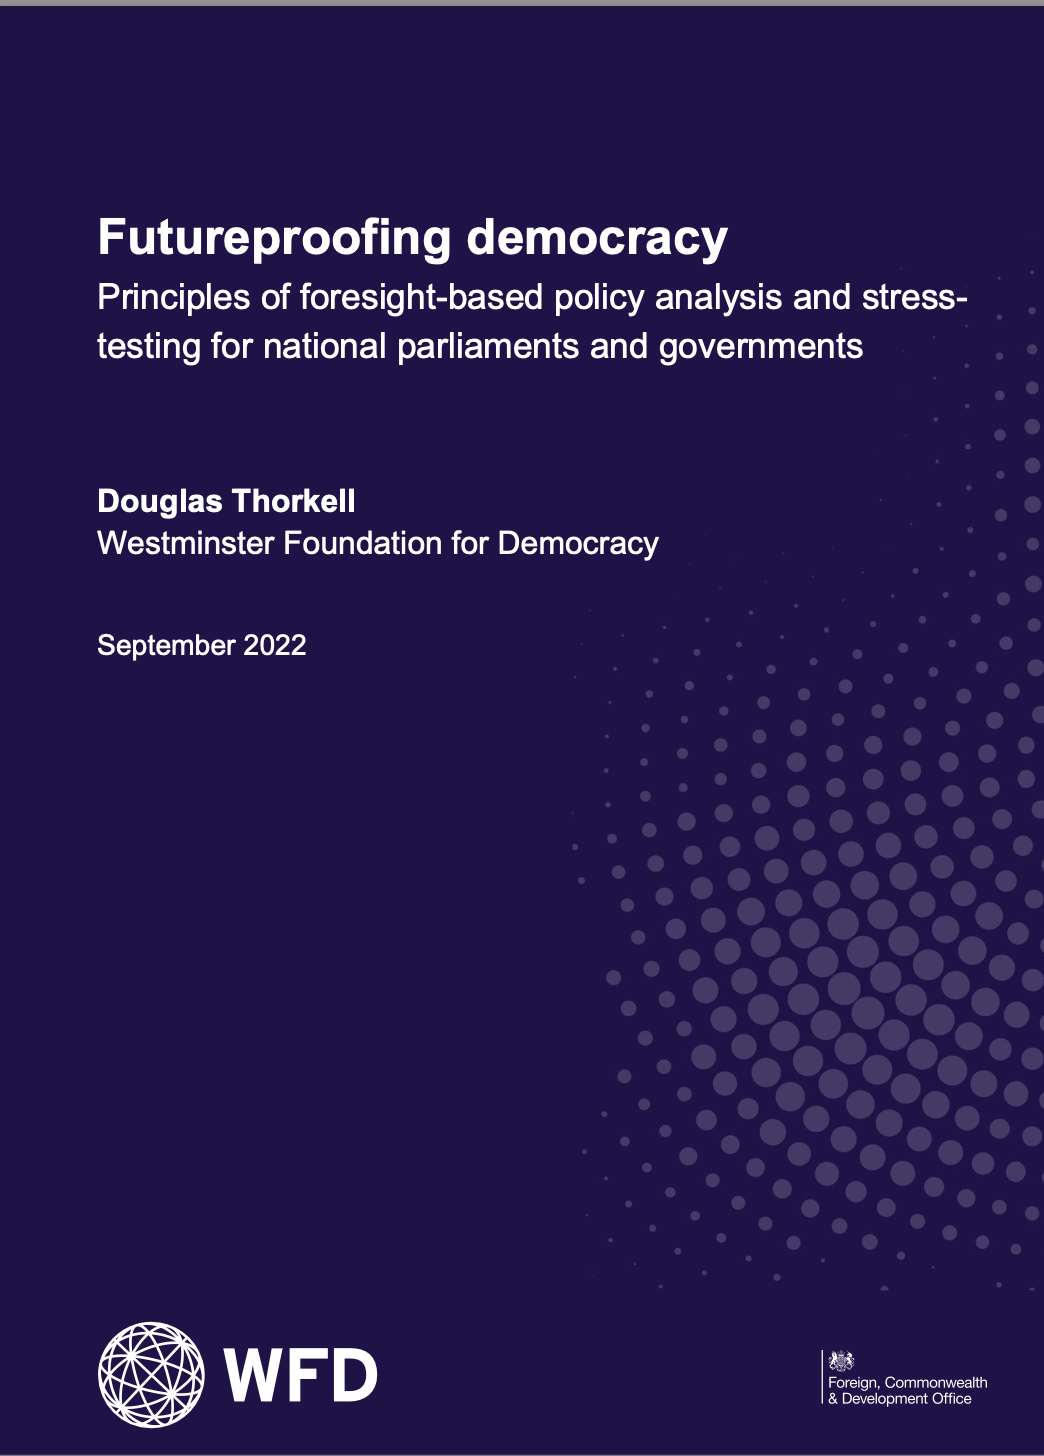 Futureproofing democracy: Principles of foresight-based policy analysis and stress-testing for national parliaments and governments